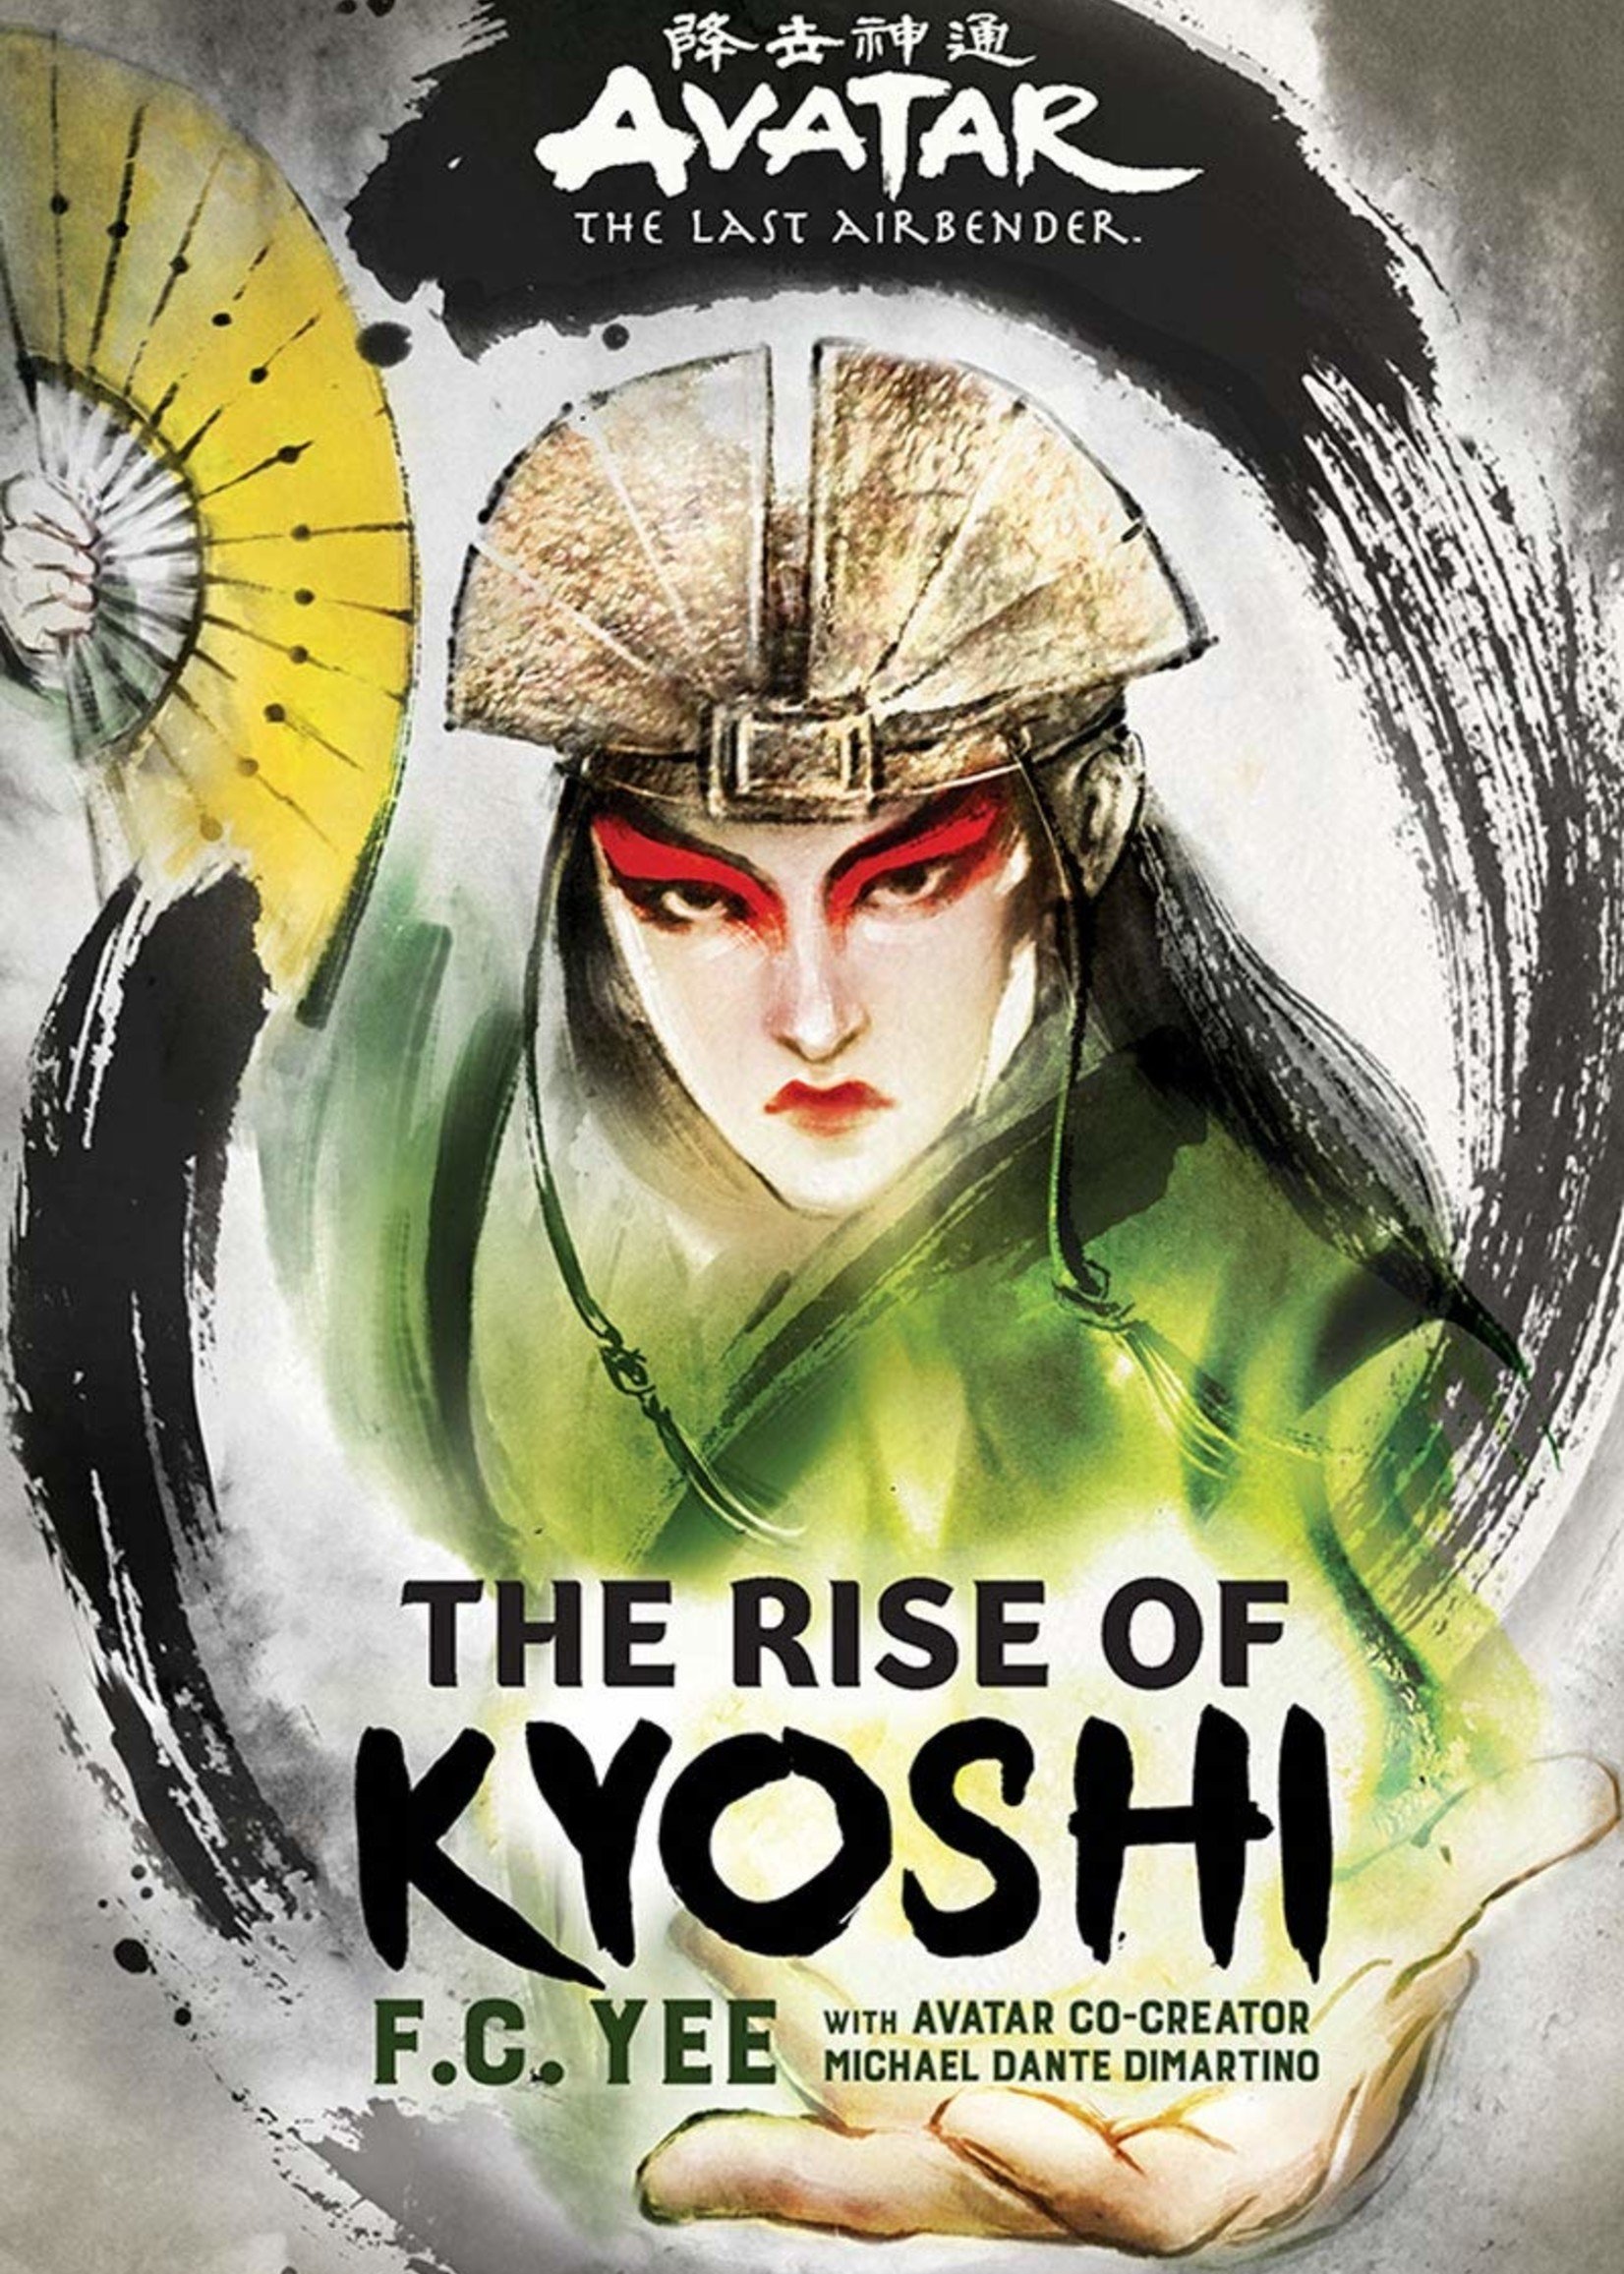 Avatar the Last Airbender: Kyoshi Novels #01, The Rise of Kyoshi - Hardcover